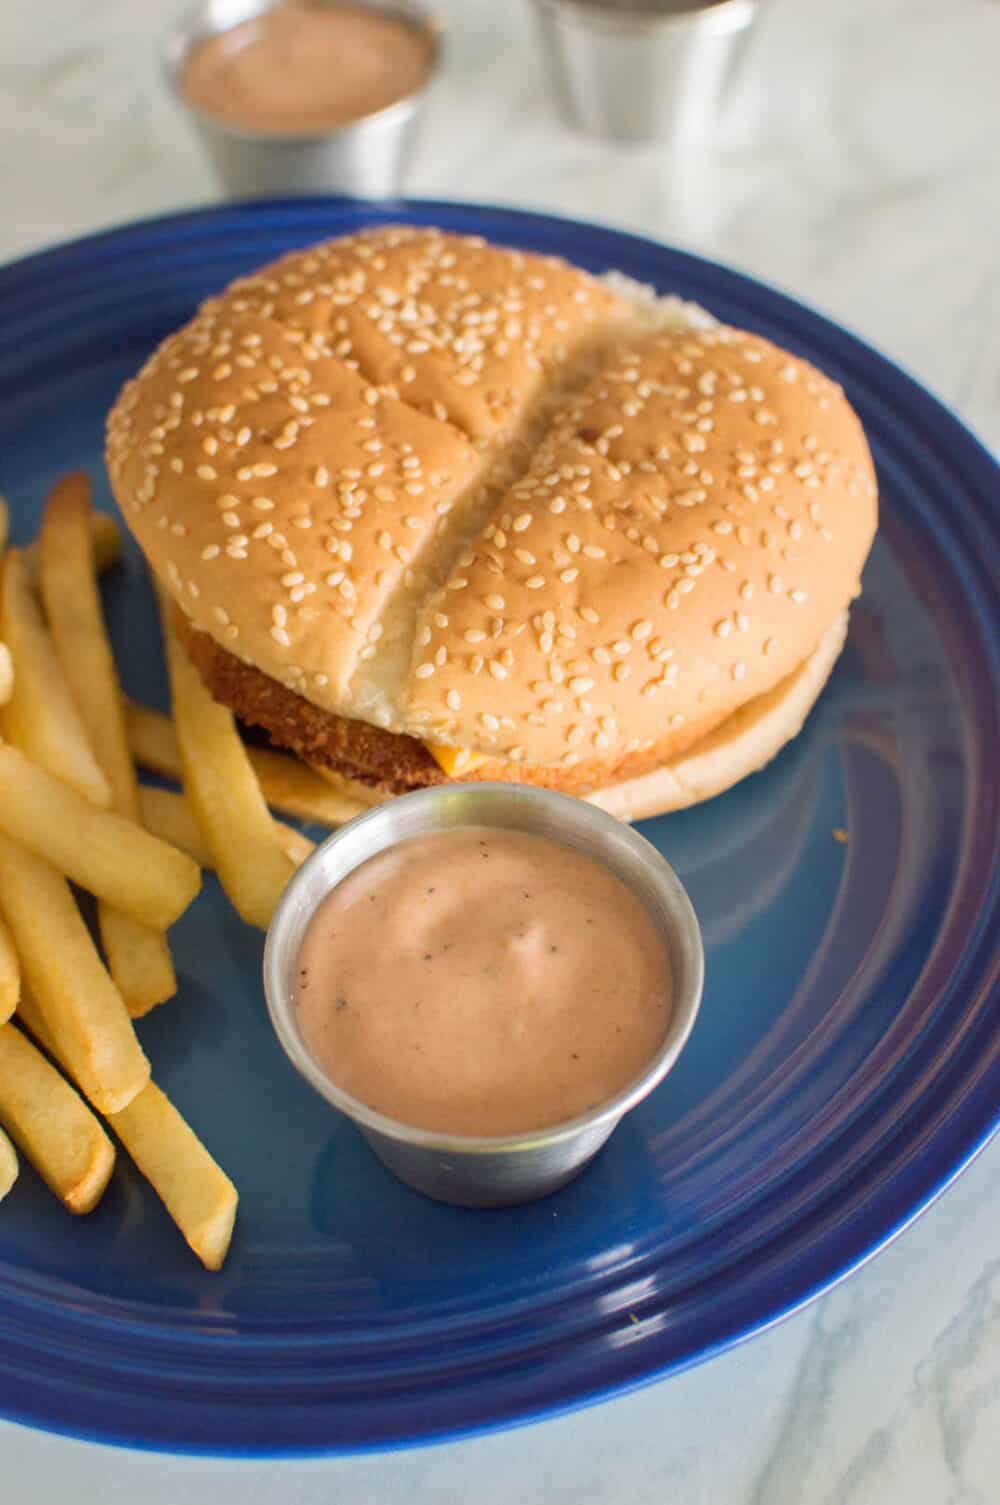 Homemade Guthrie’s Sauce in a small, silver bowl with a chicken burger and French fries